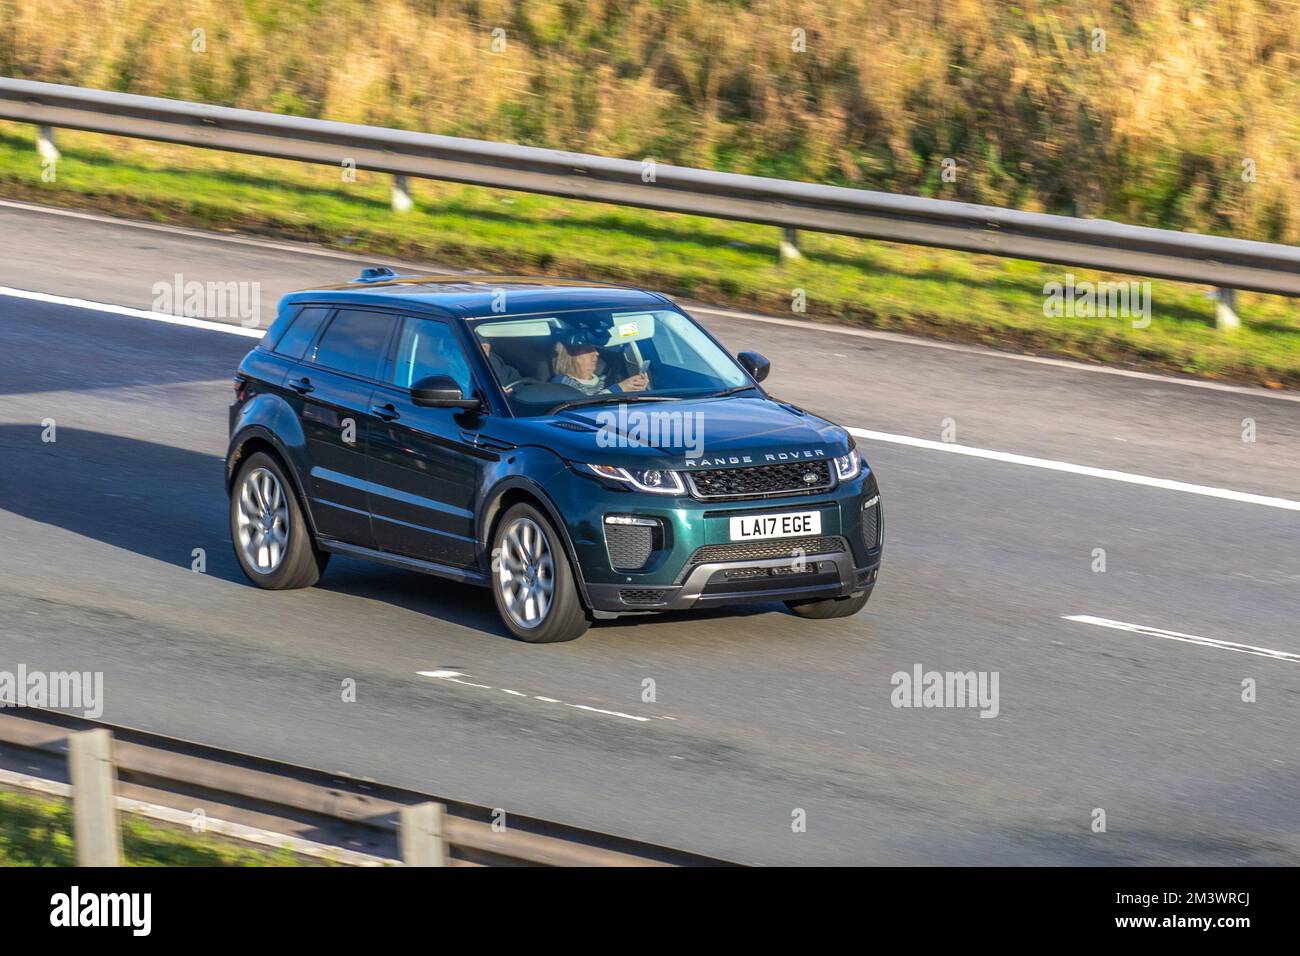 2017 Green LAND ROVER EVOQUE 1999cc Petrol 9 speed sequential automatic; travelling on the M6 motorway, UK Stock Photo